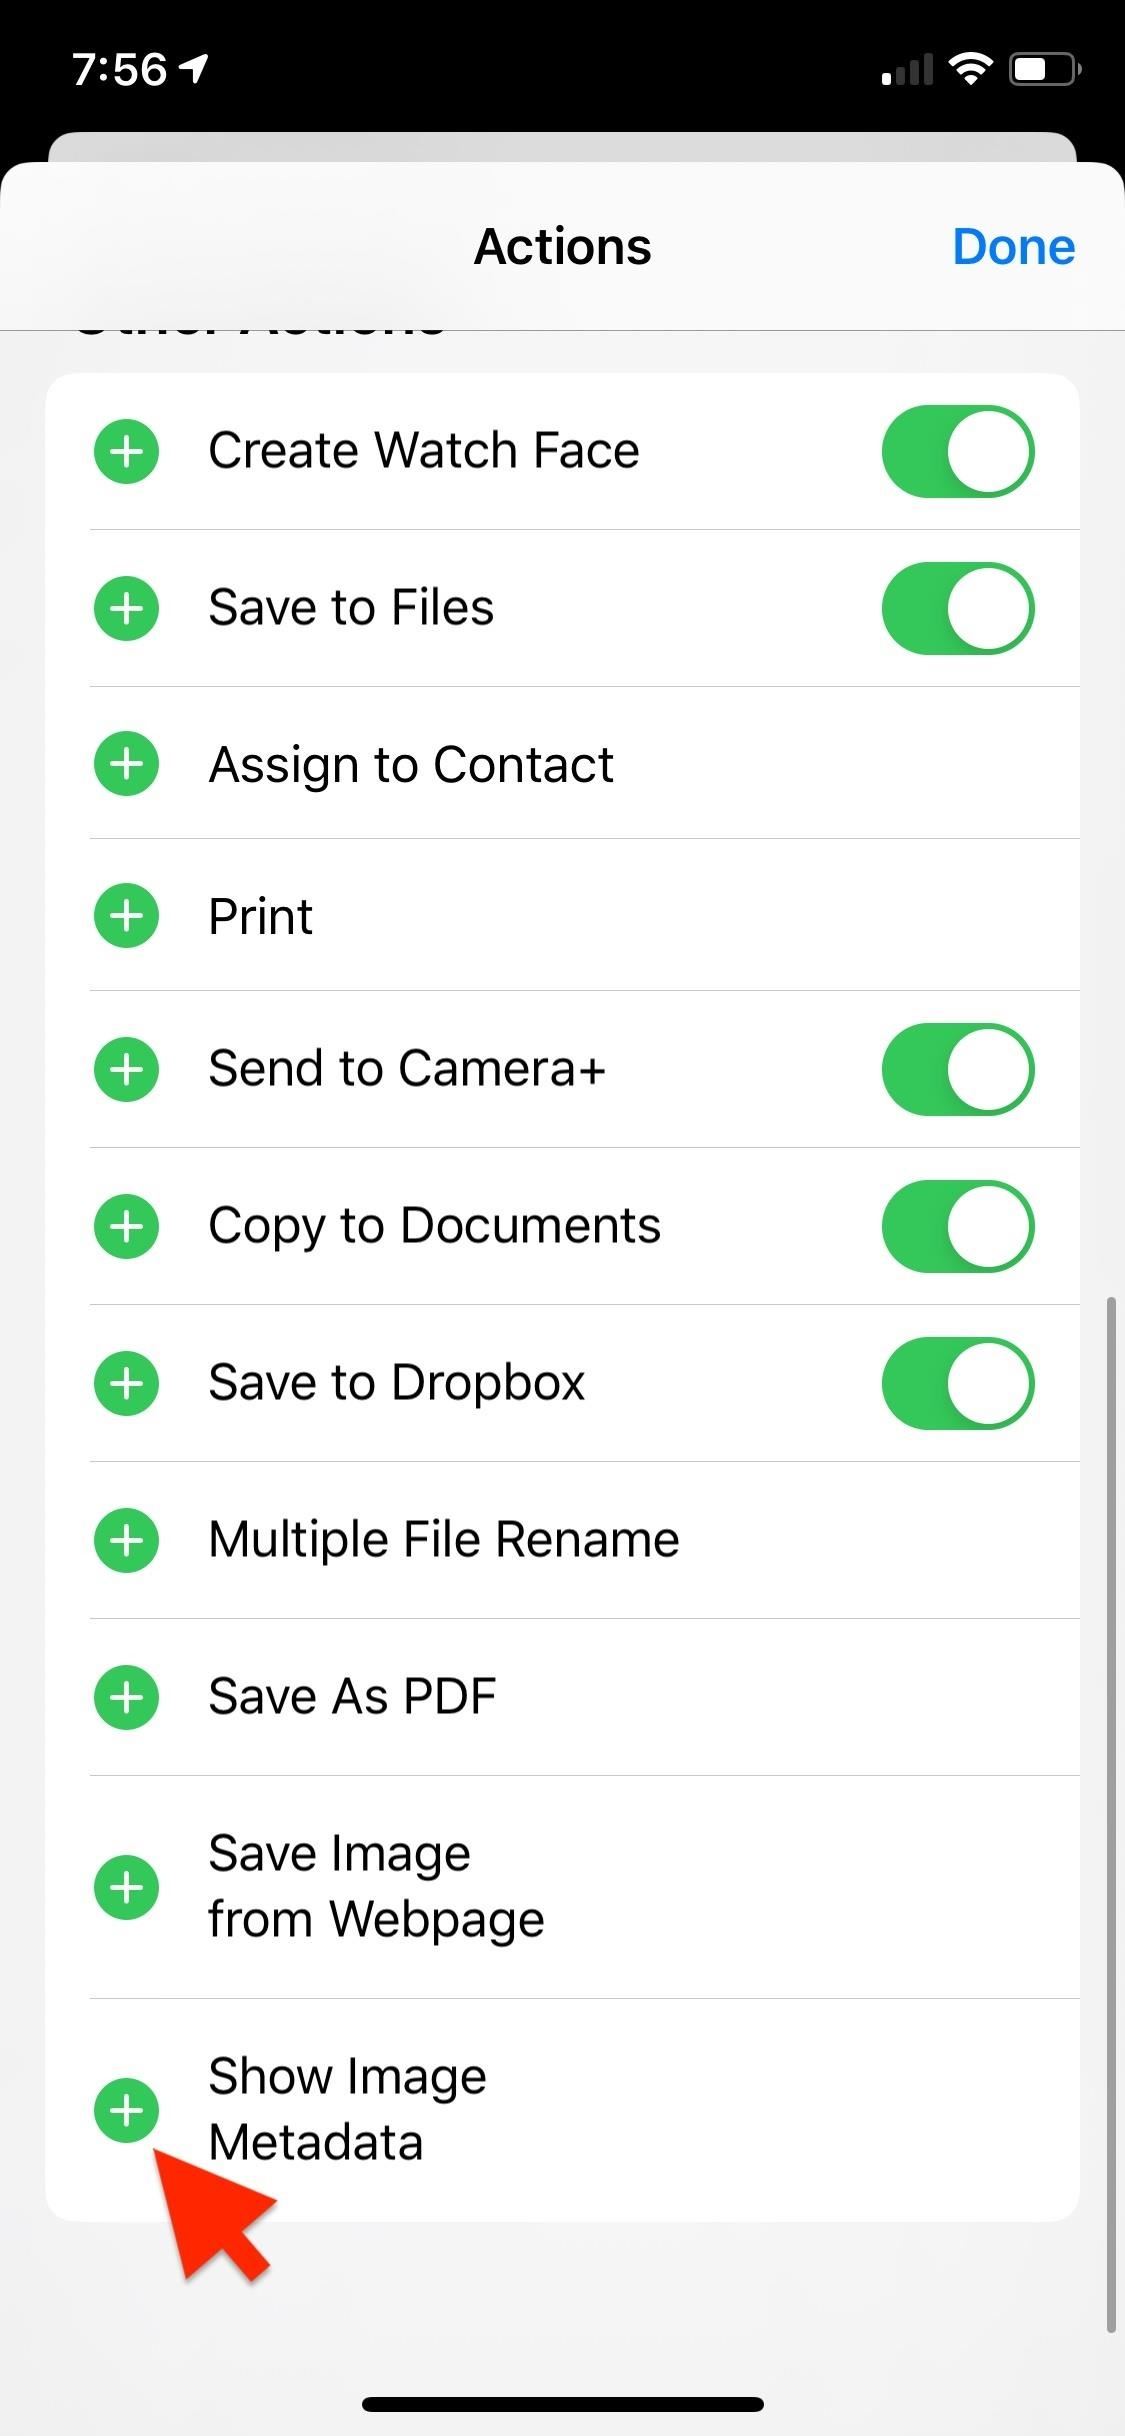 How to Add Custom Shortcuts to Your iPhone's Share Sheet & Reorganize Them for Quicker Access